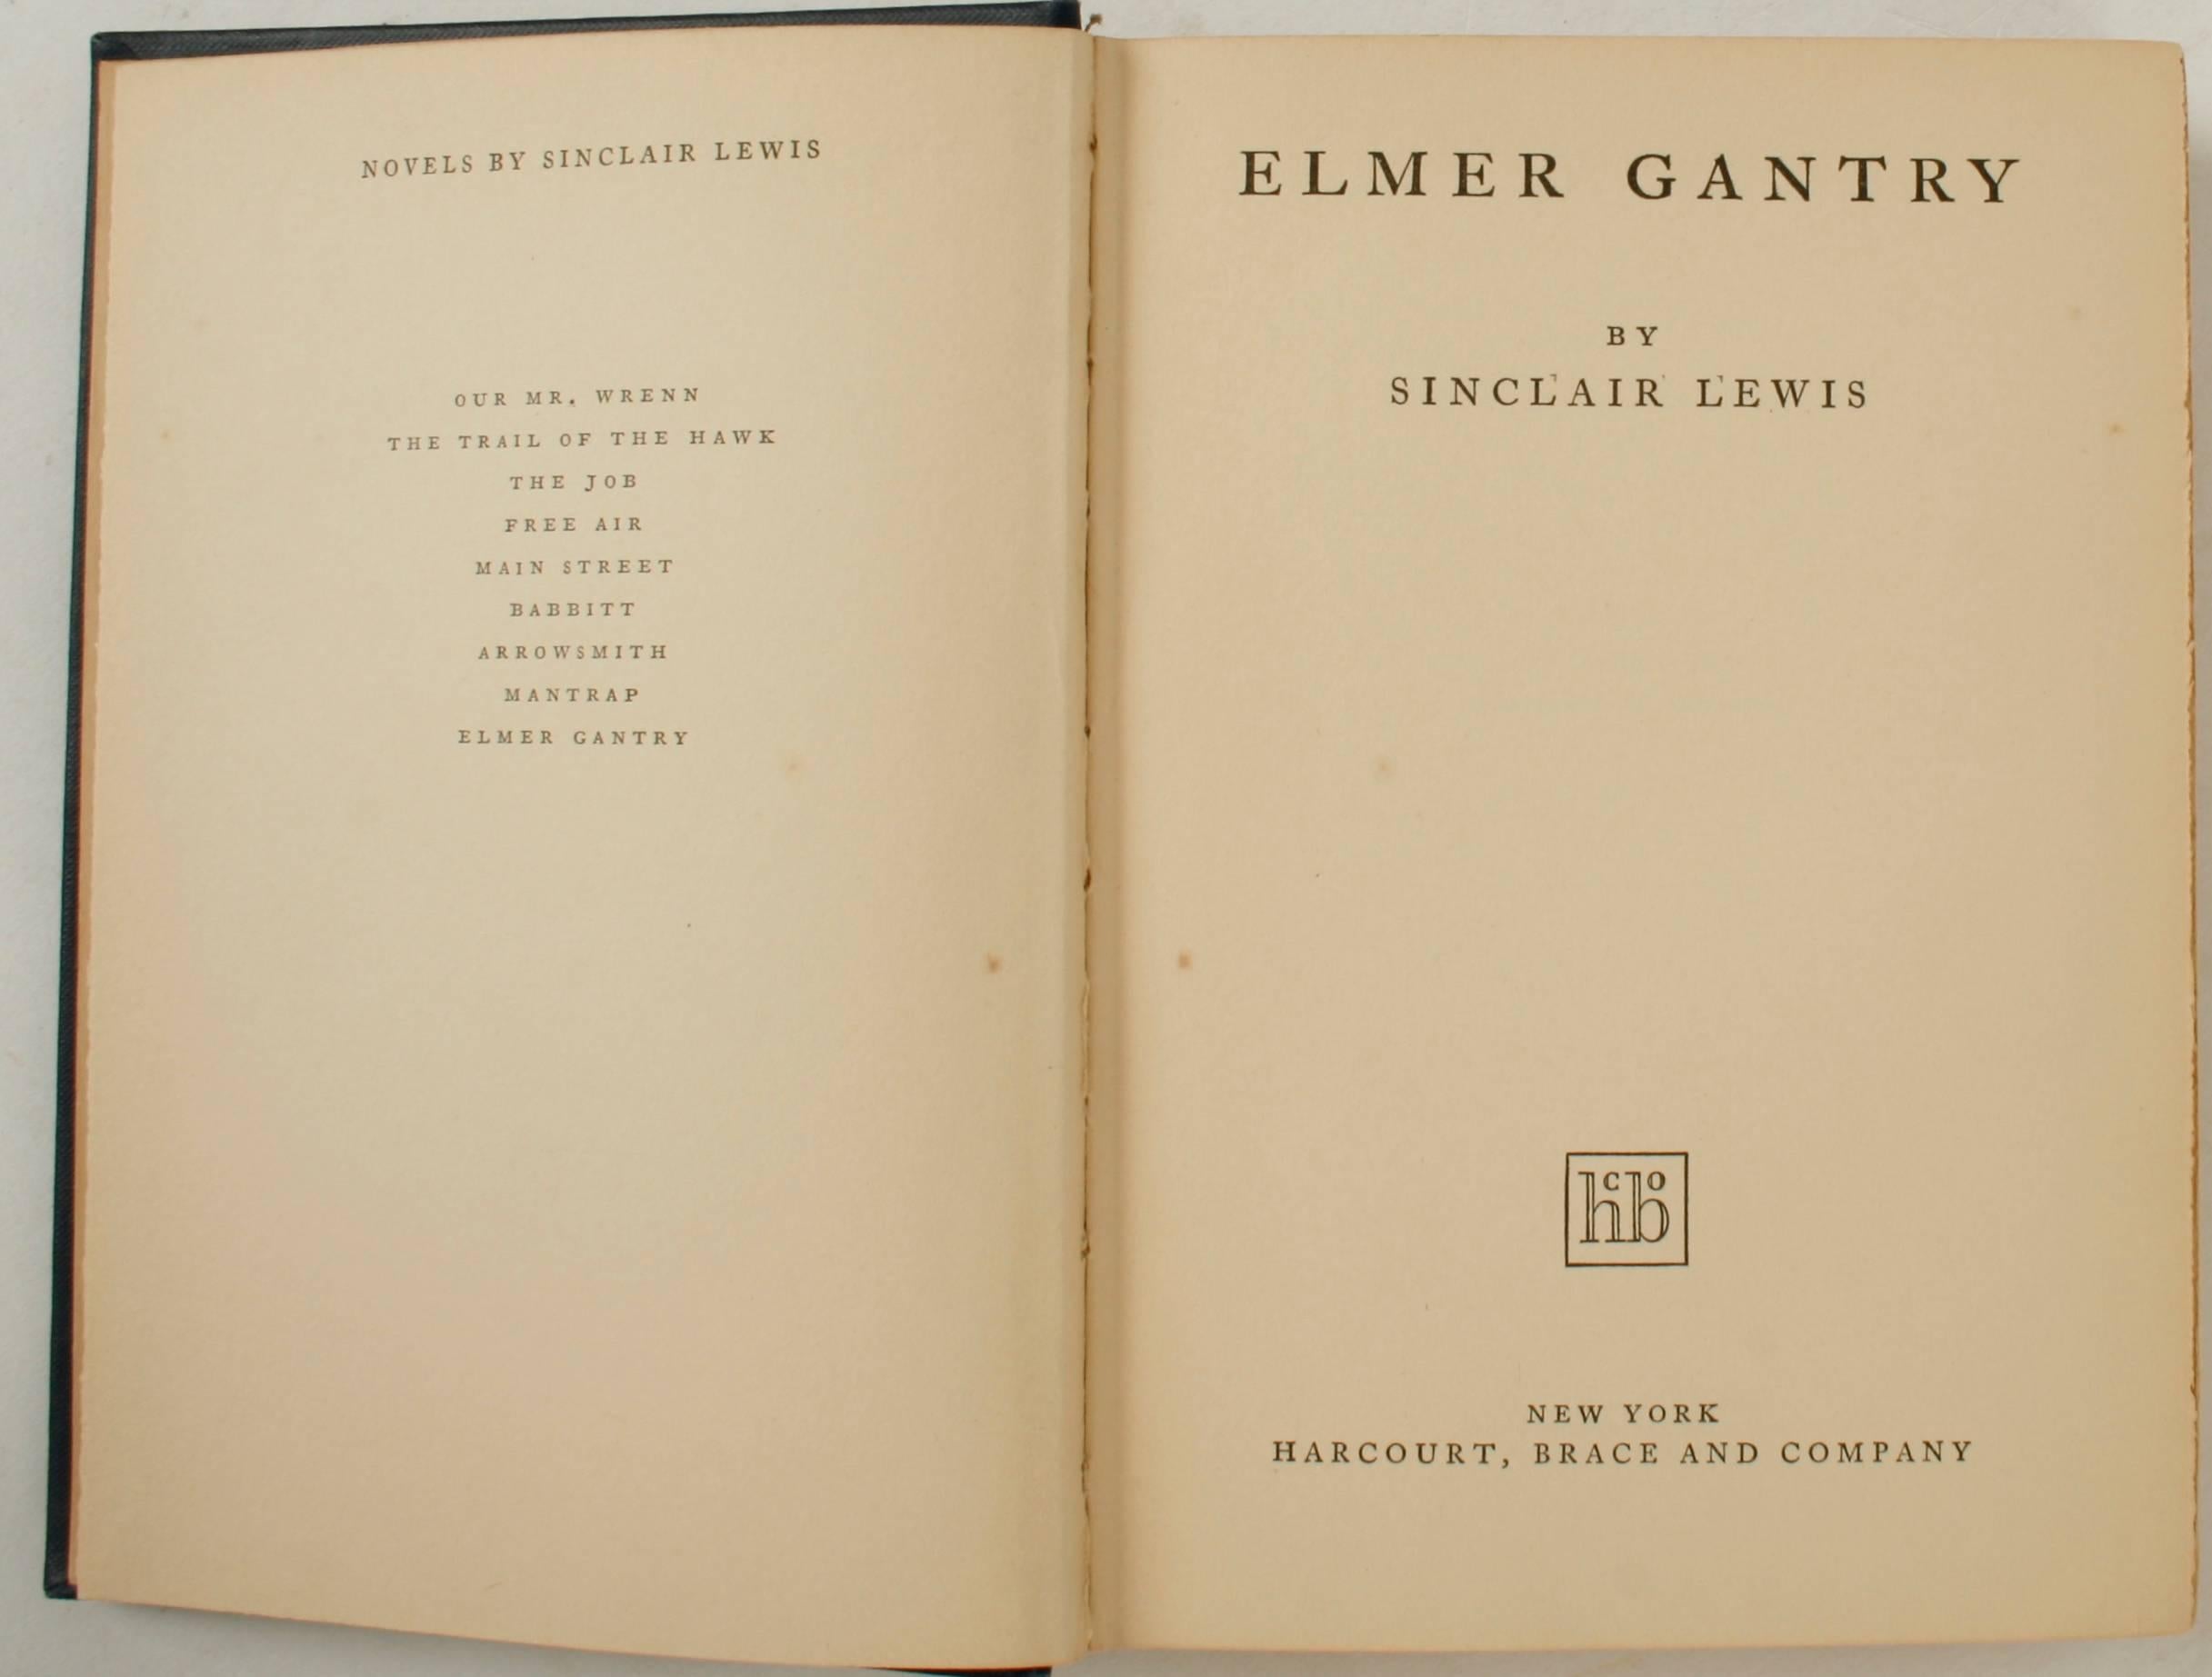 American Elmer Gantry by Sinclair Lewis, First Edition For Sale